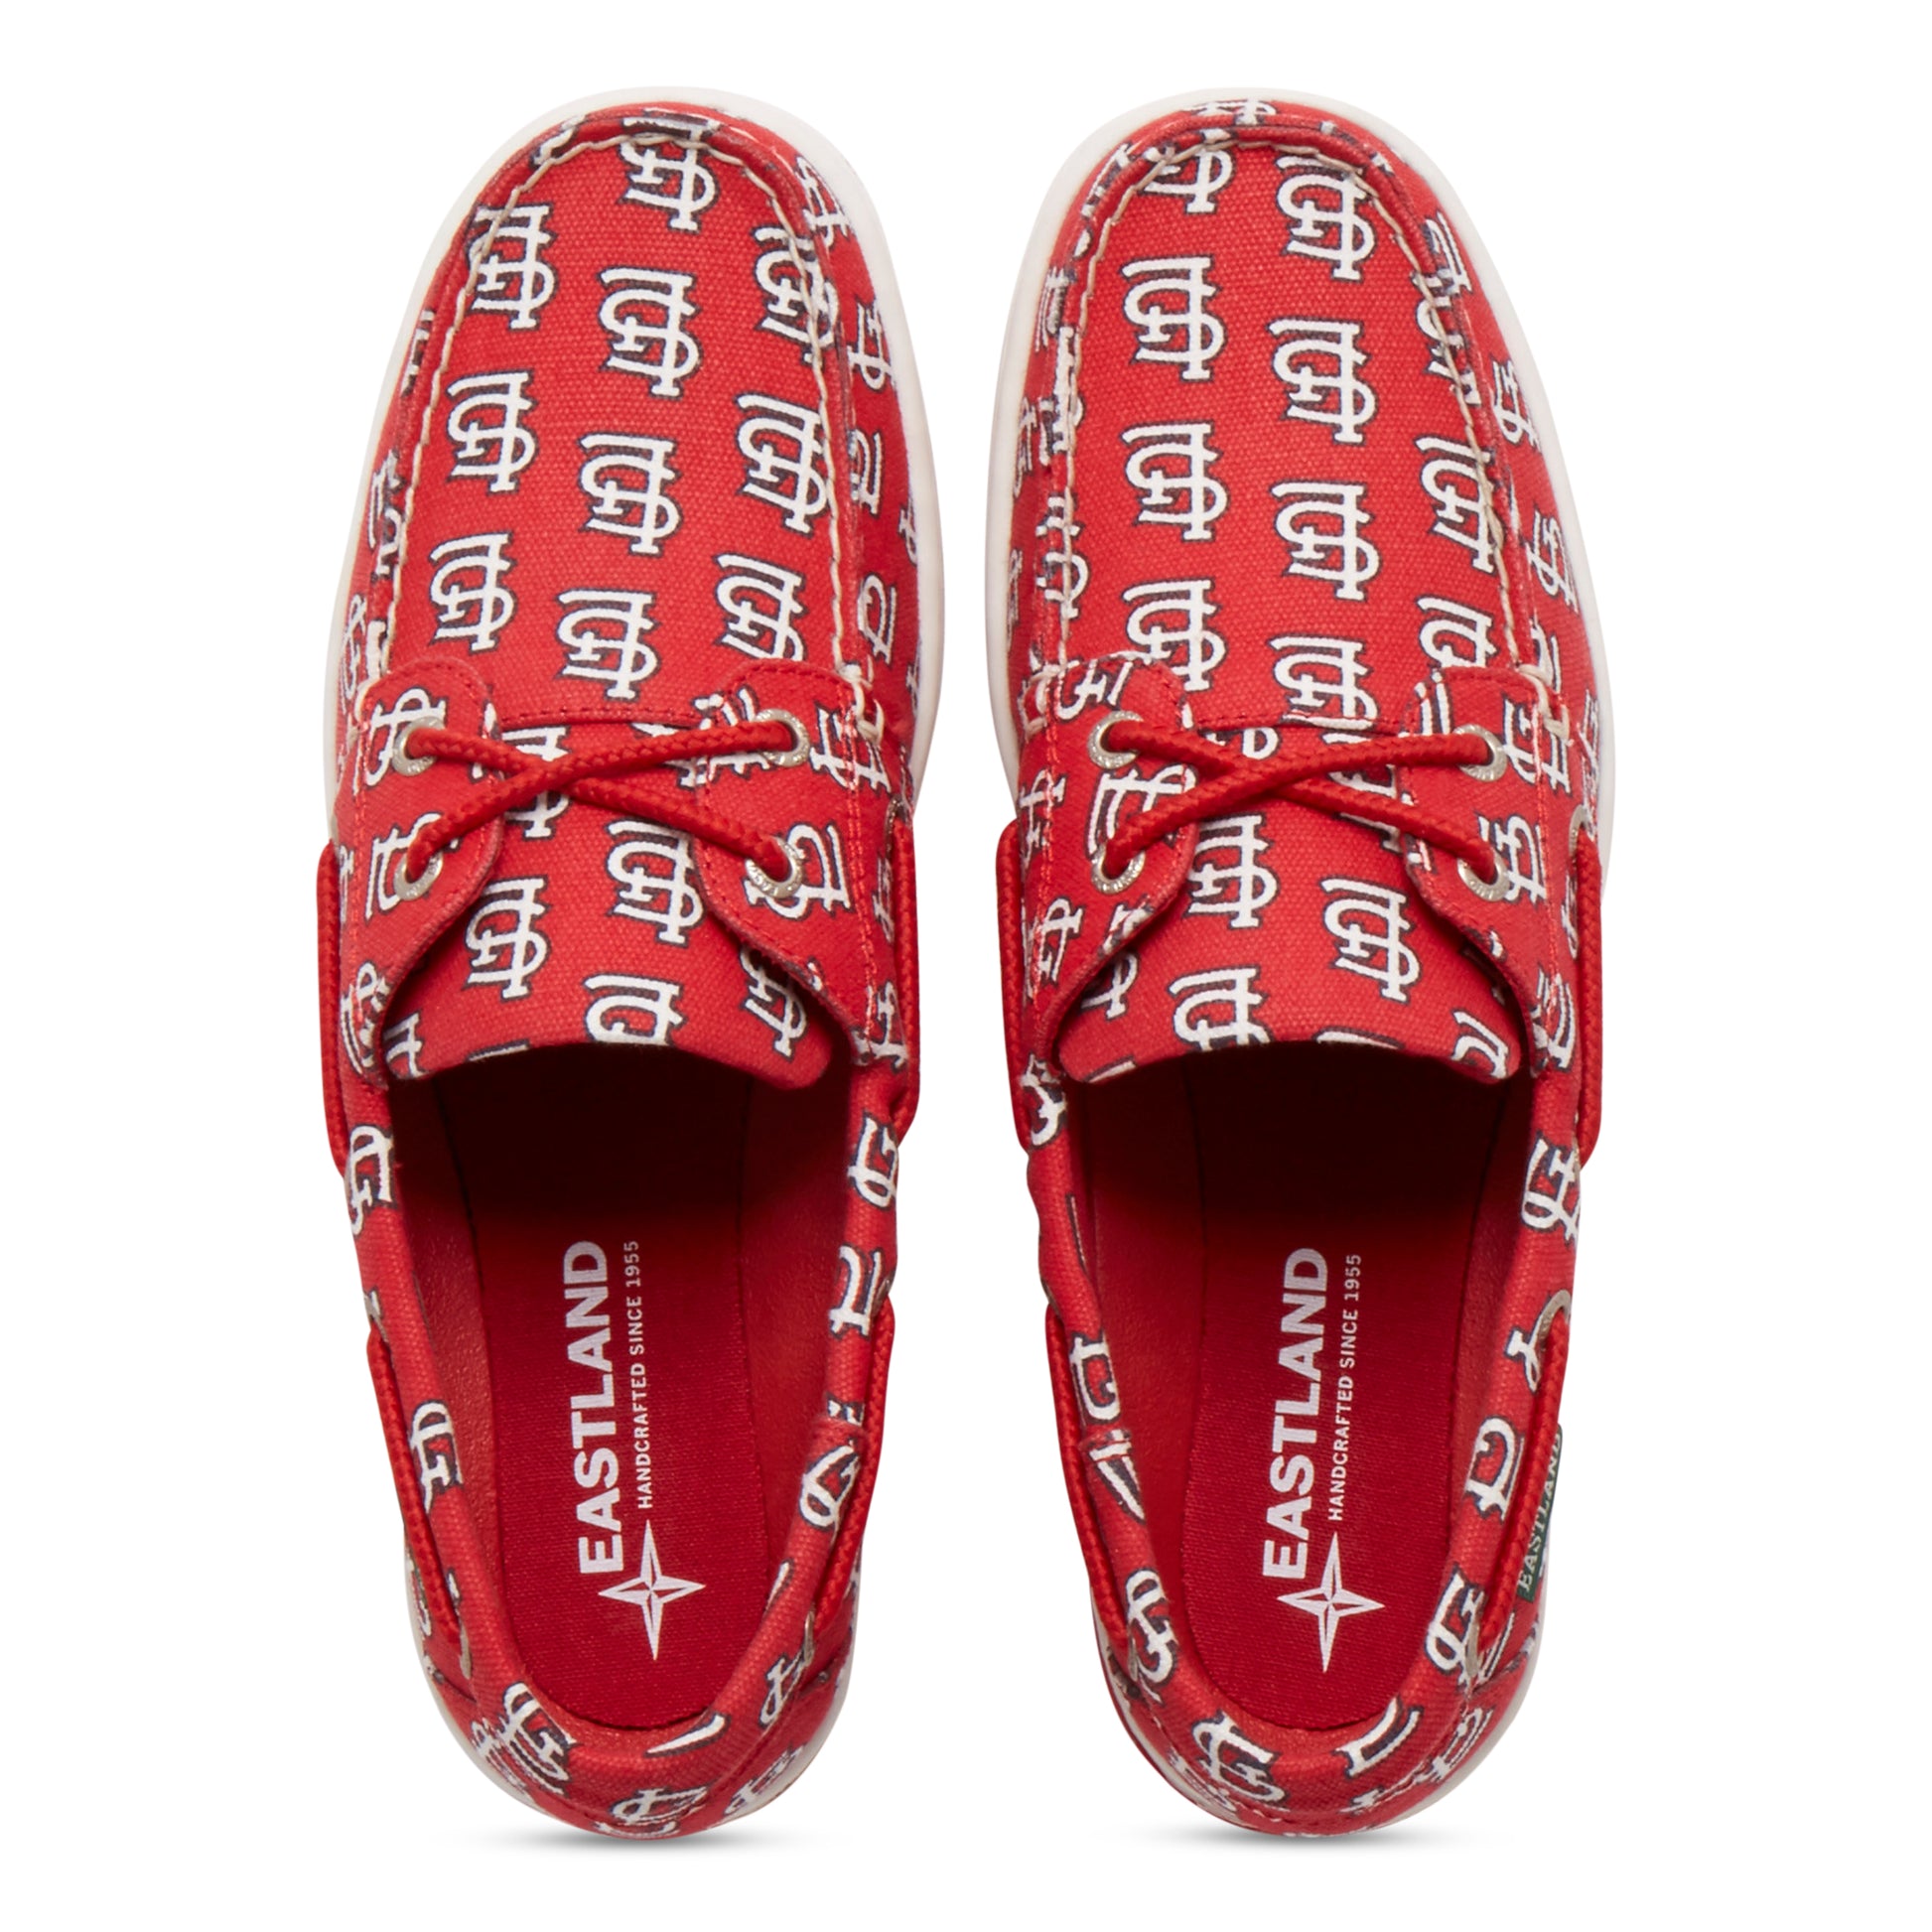 St. Louis Cardinals Womens Boat Shoes by Eastland